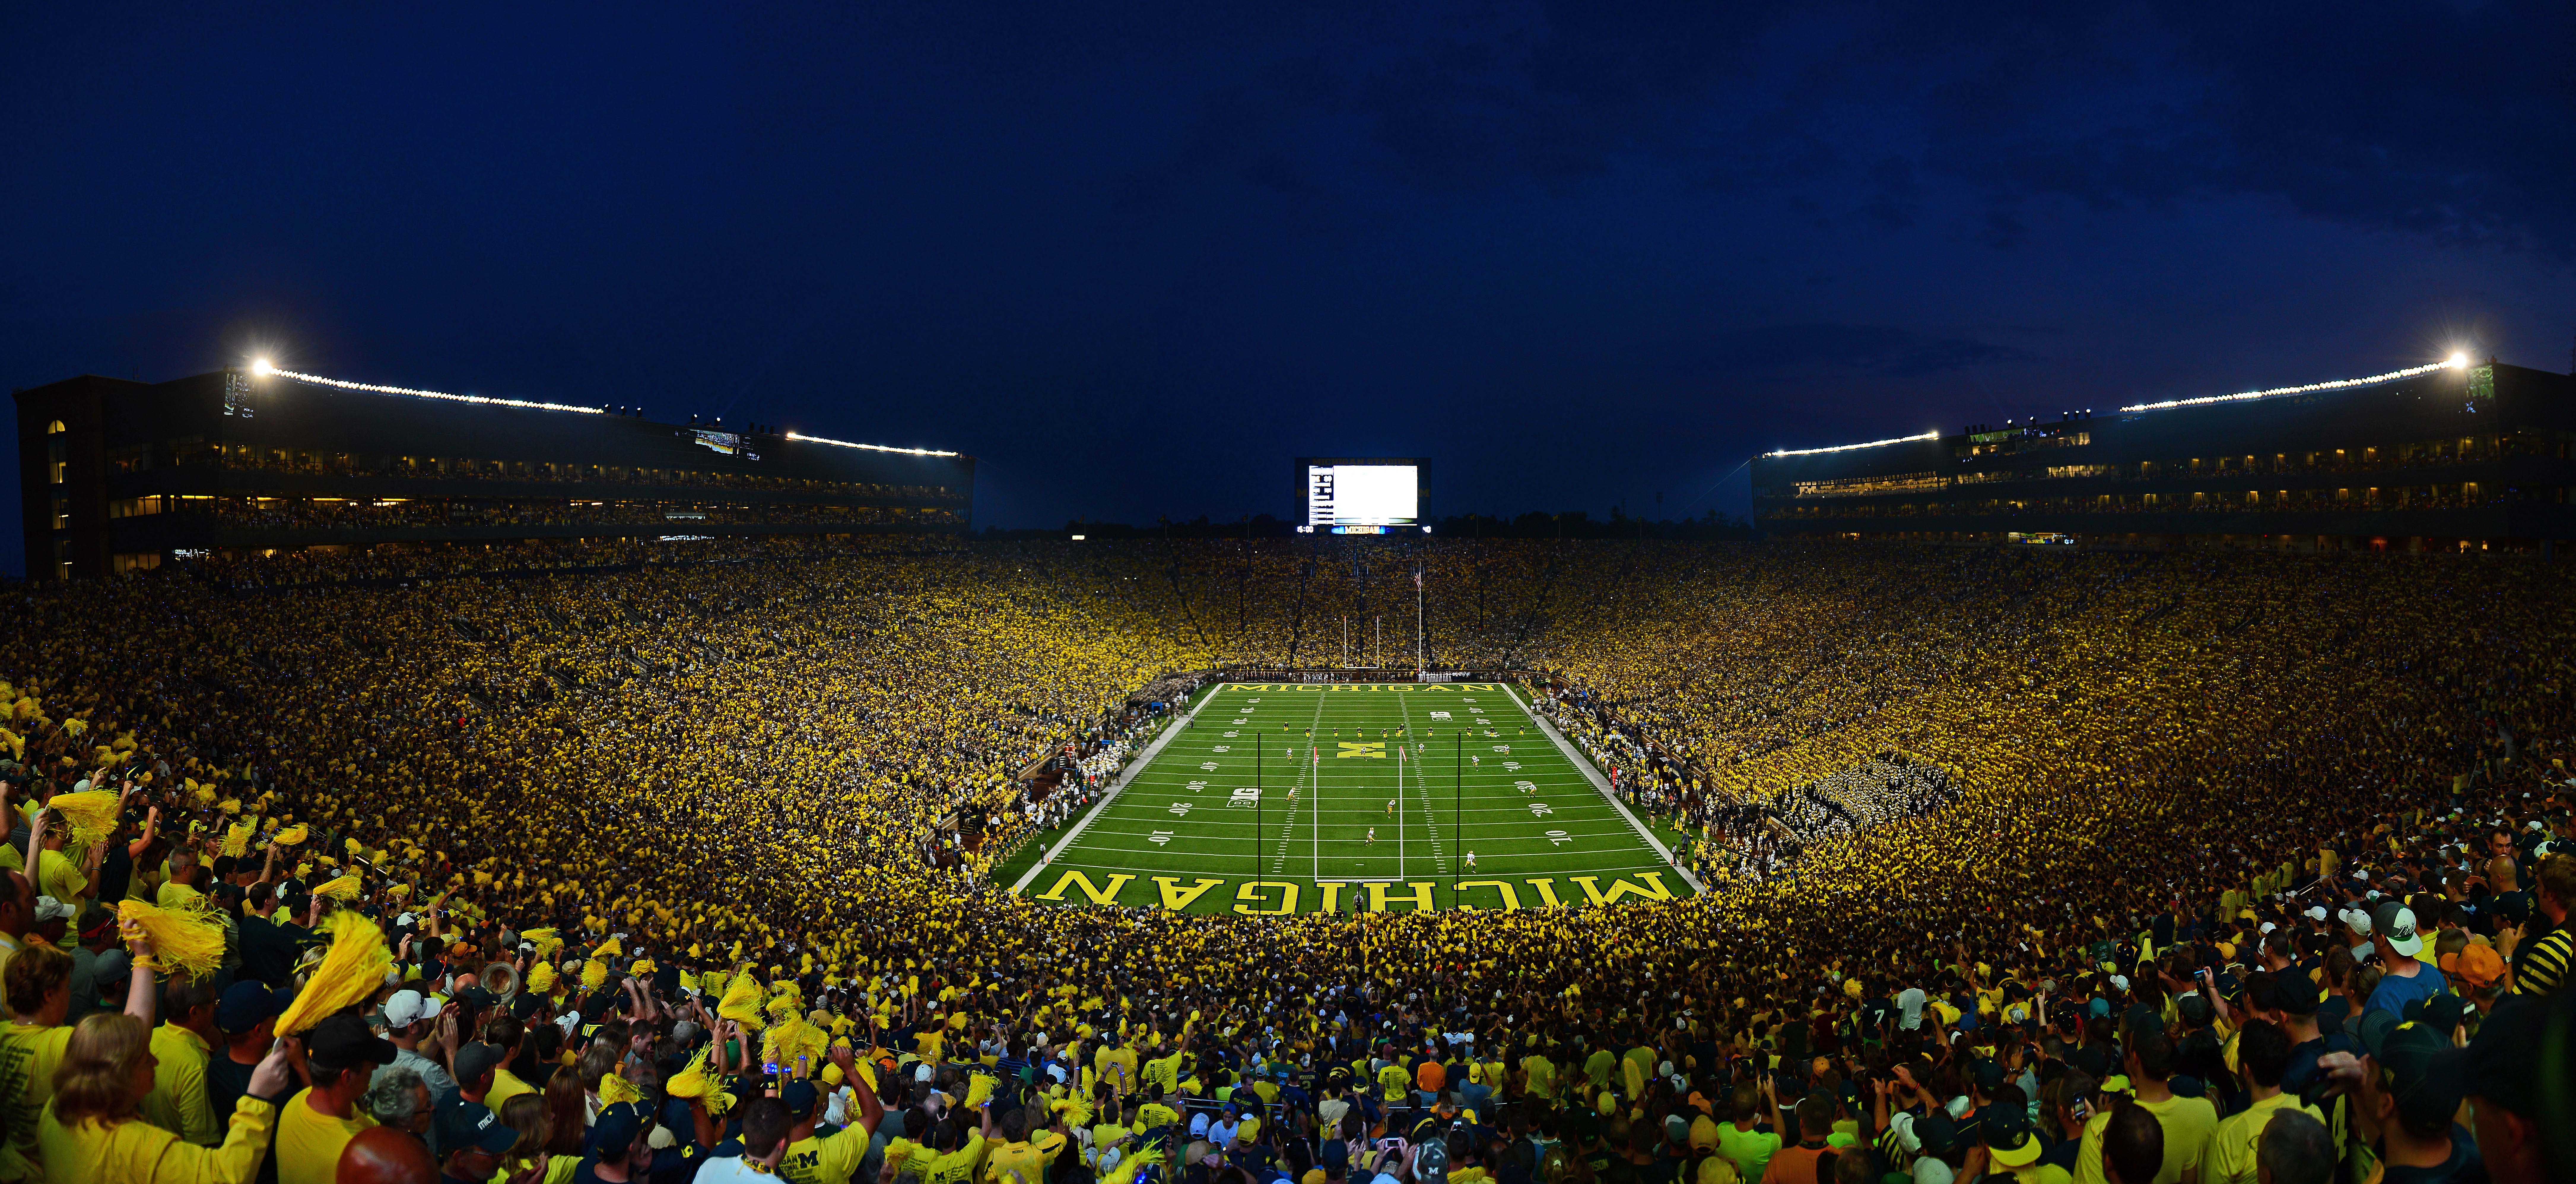 Michigan will host its firstever Big Ten night game against Penn State